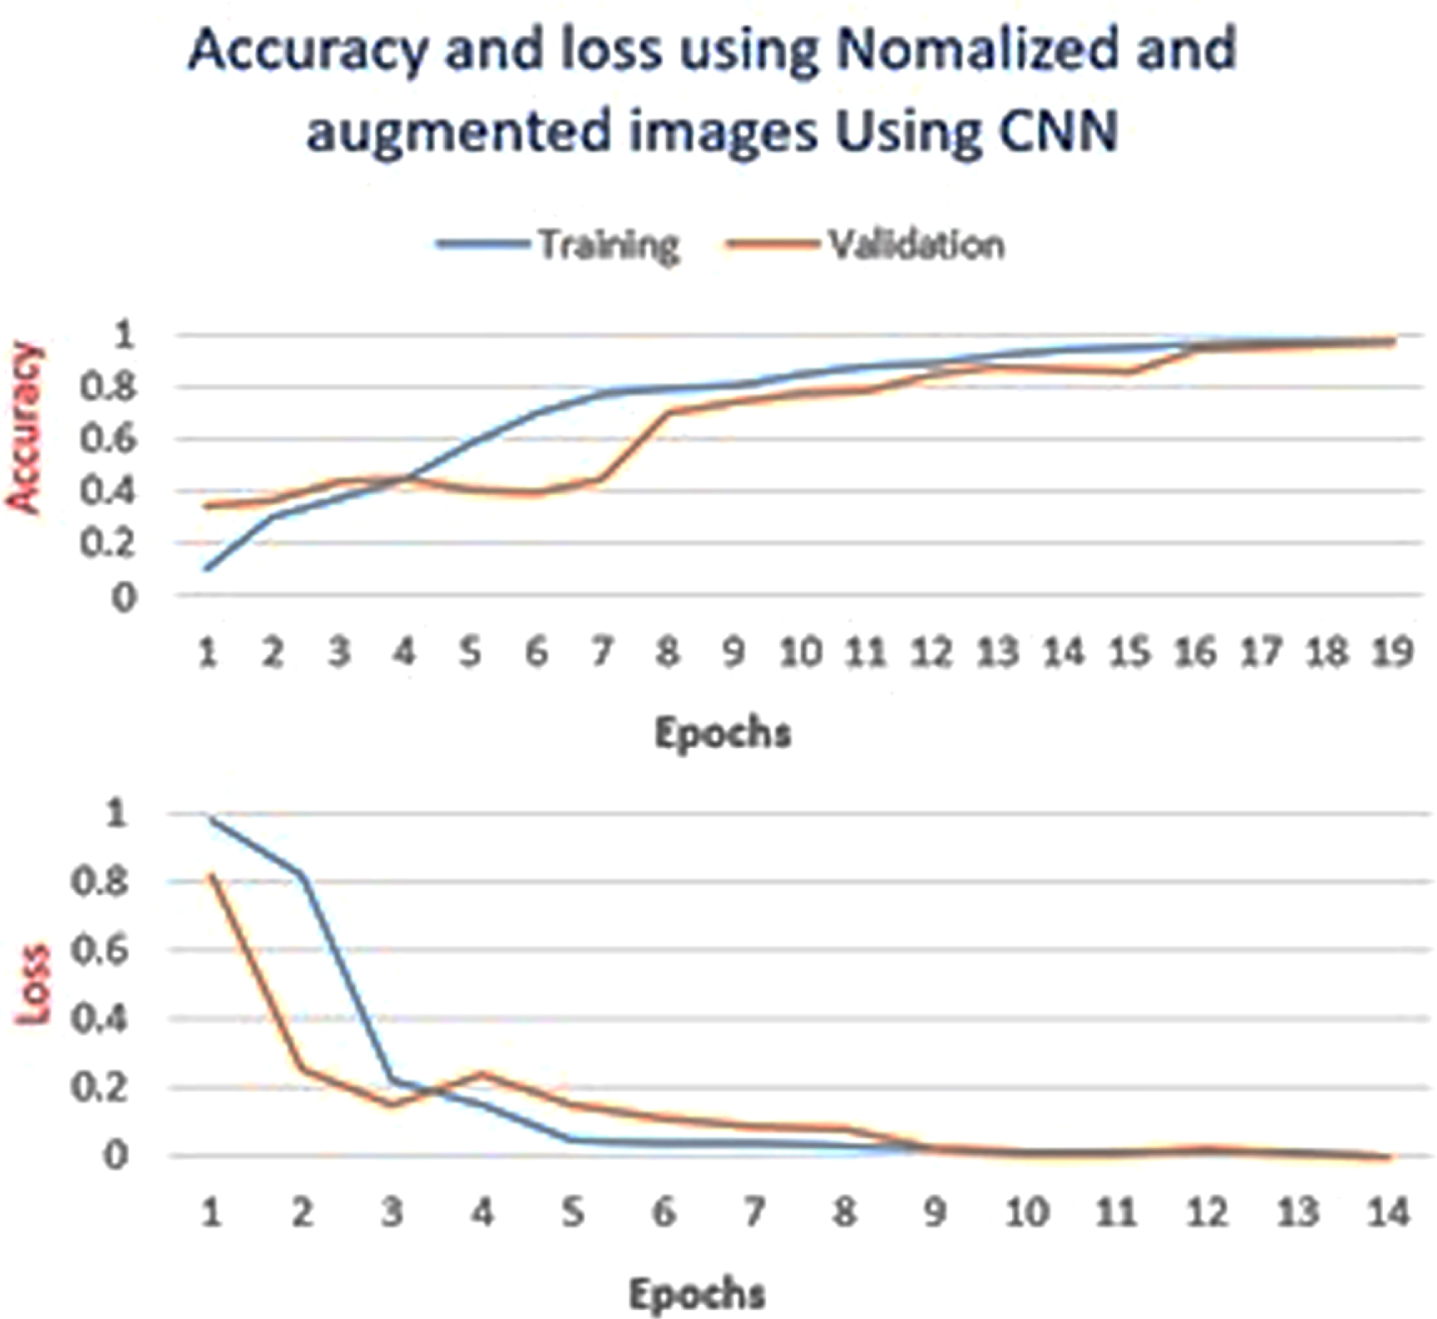 CNN model: Graphs of training accuracy and loss for pre-processed and augmented images